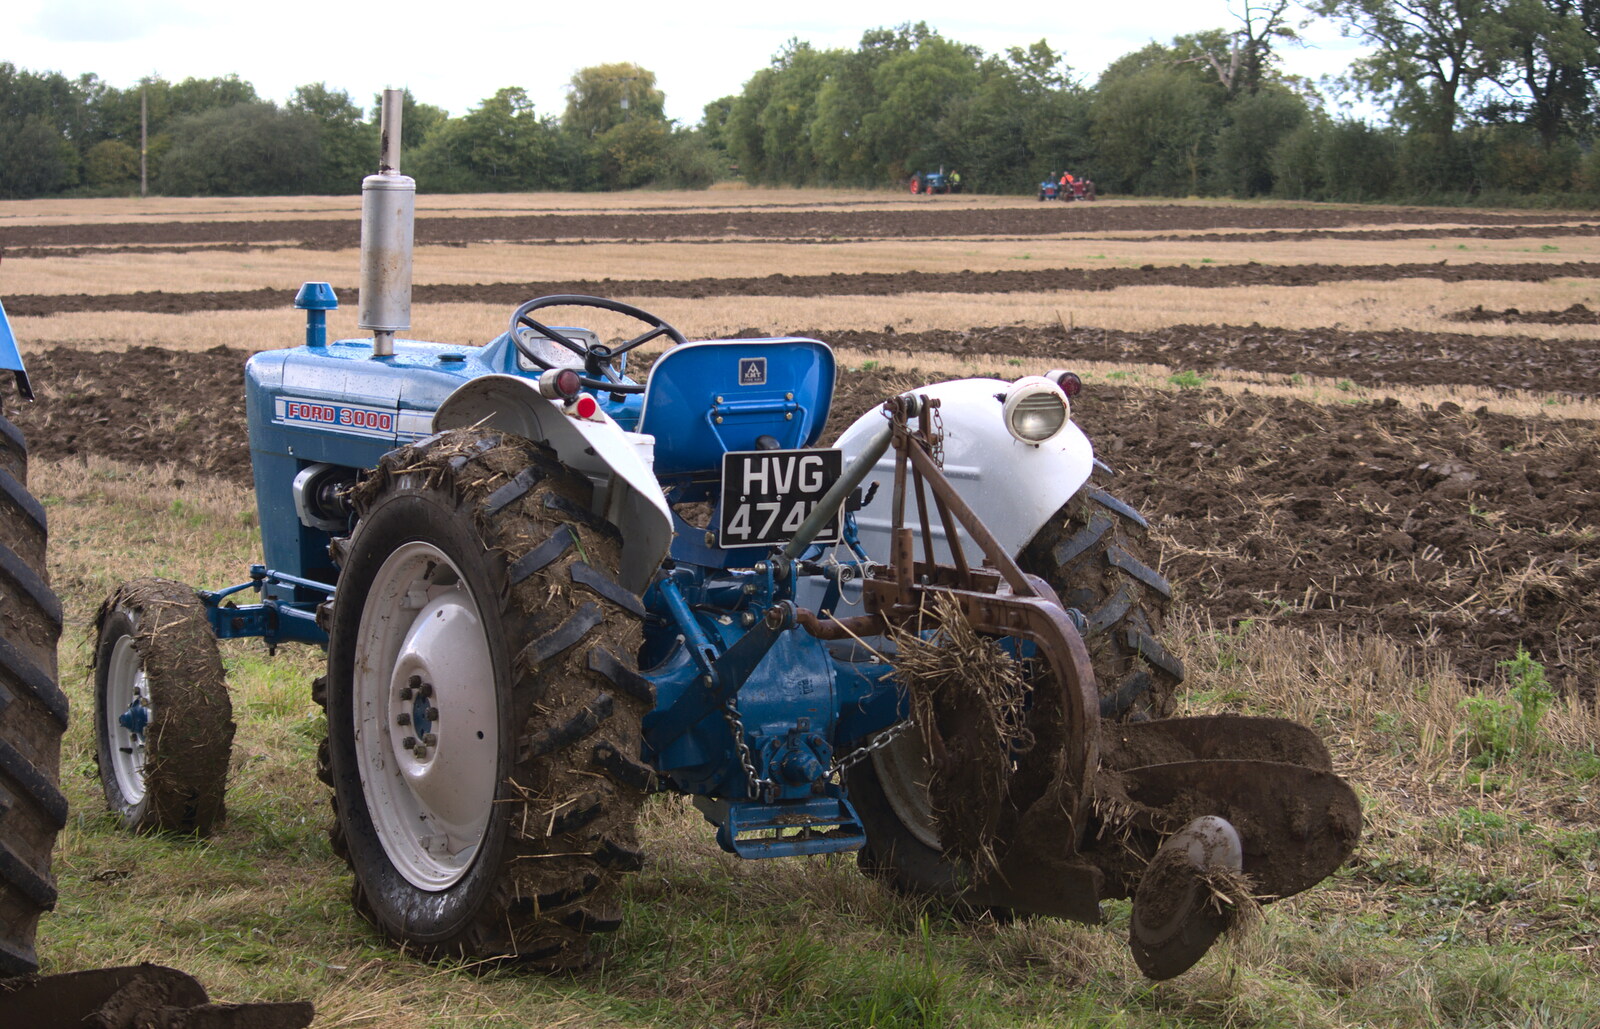 The Ford 3000, with mud-caked tyres from Ploughing and Pizza, Thrandeston and Bury St. Edmunds, Suffolk - 17th September 2017